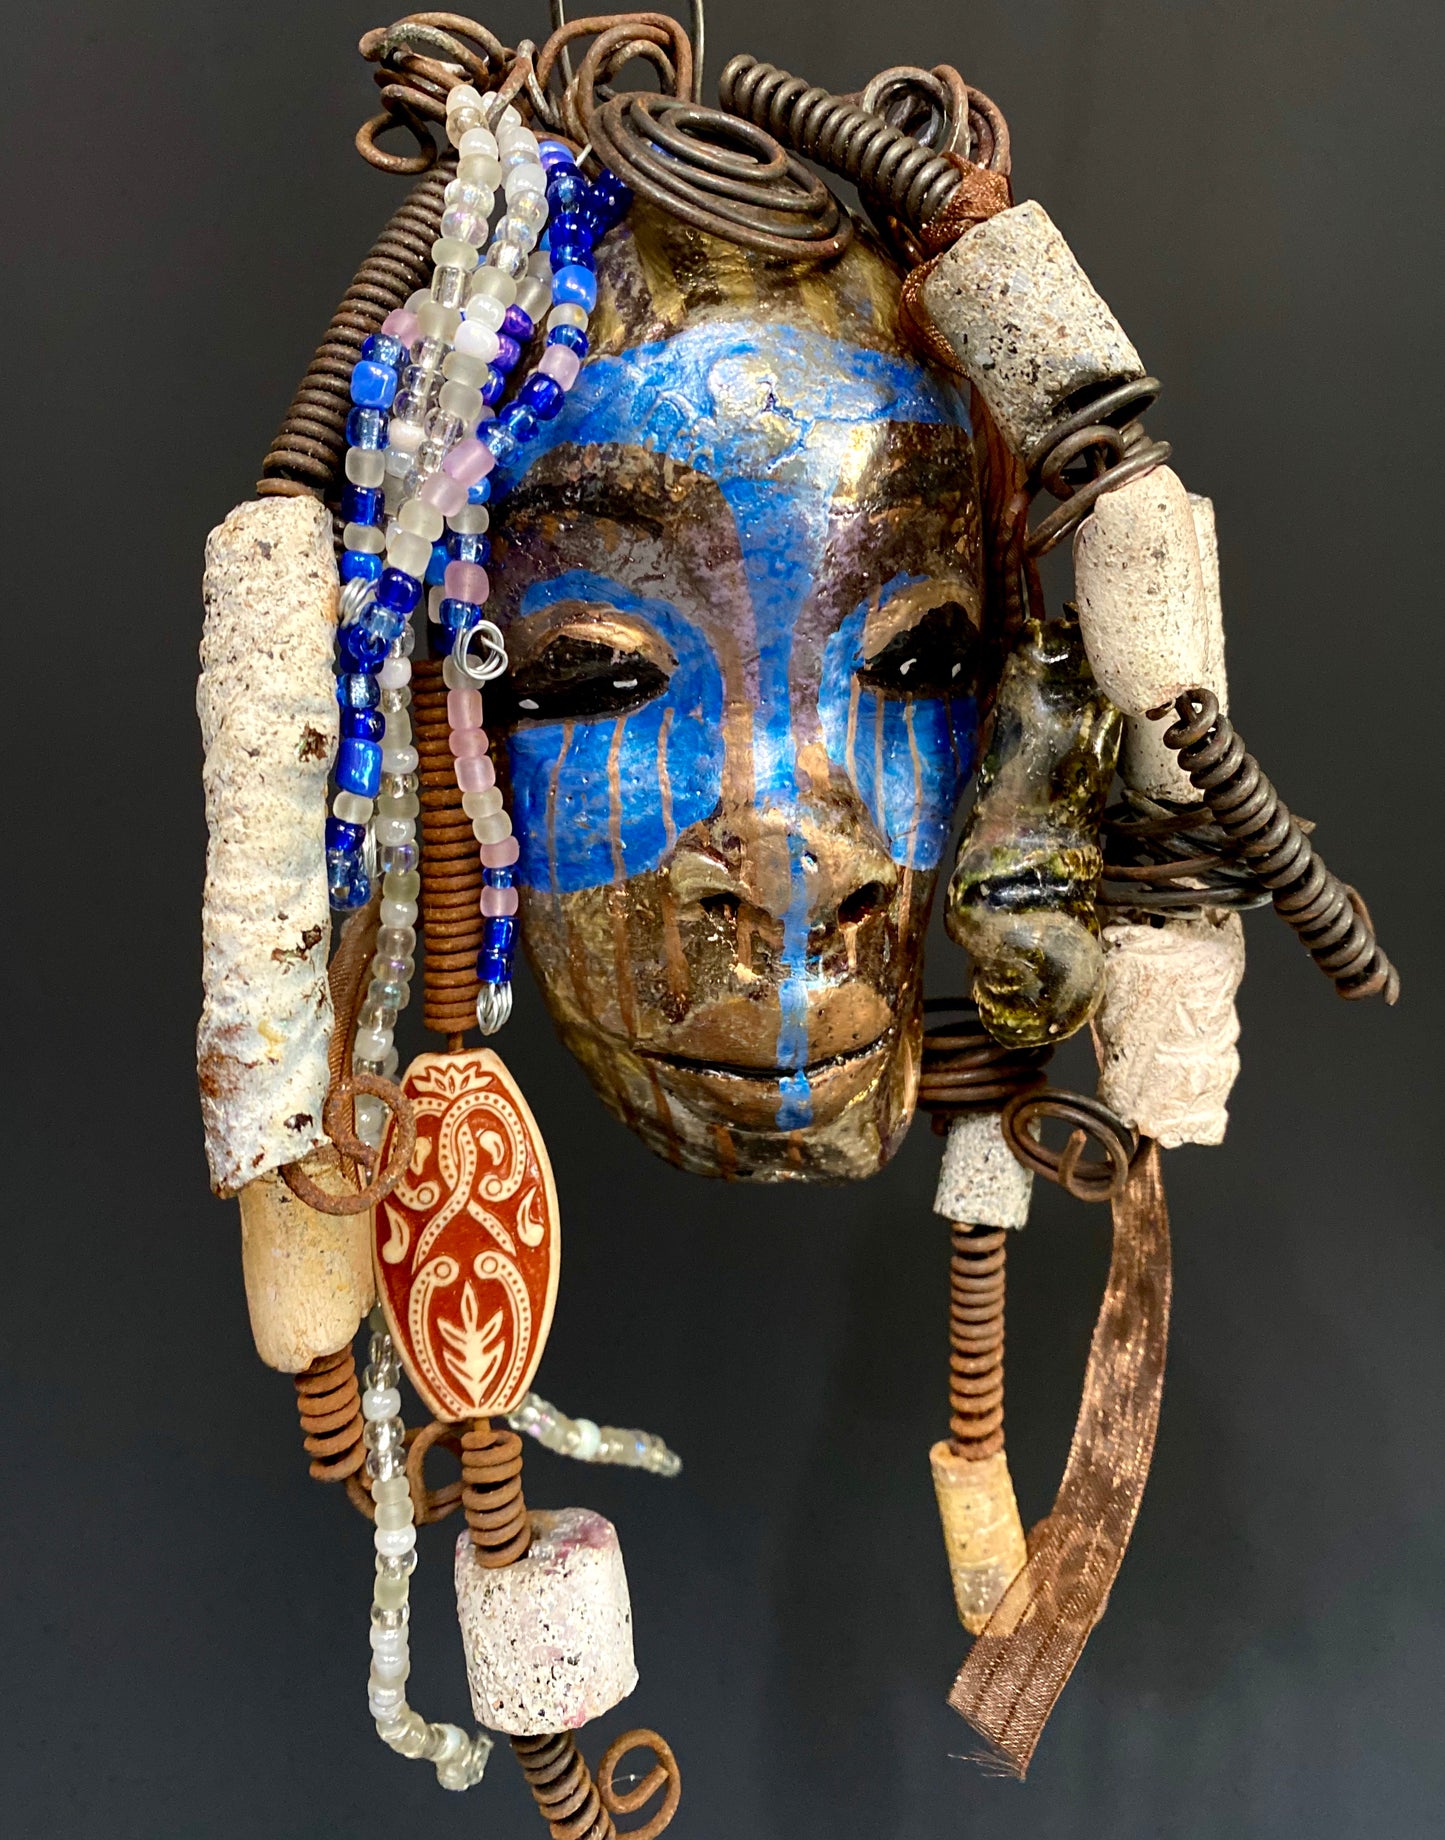 I started making mask soon after seeing authentic African artwork at the Smithsonian Museum of African Art. I was in total awe. I was inspired by my visit there..  Haze has a multi colored blue tone  metallic copper complexion. She is 7" x 5" and weighs 10 ozs. Haze  has  over 50 mini beads and handmade raku beads. Haze has over 4 feet of 16 gauge wire hair.